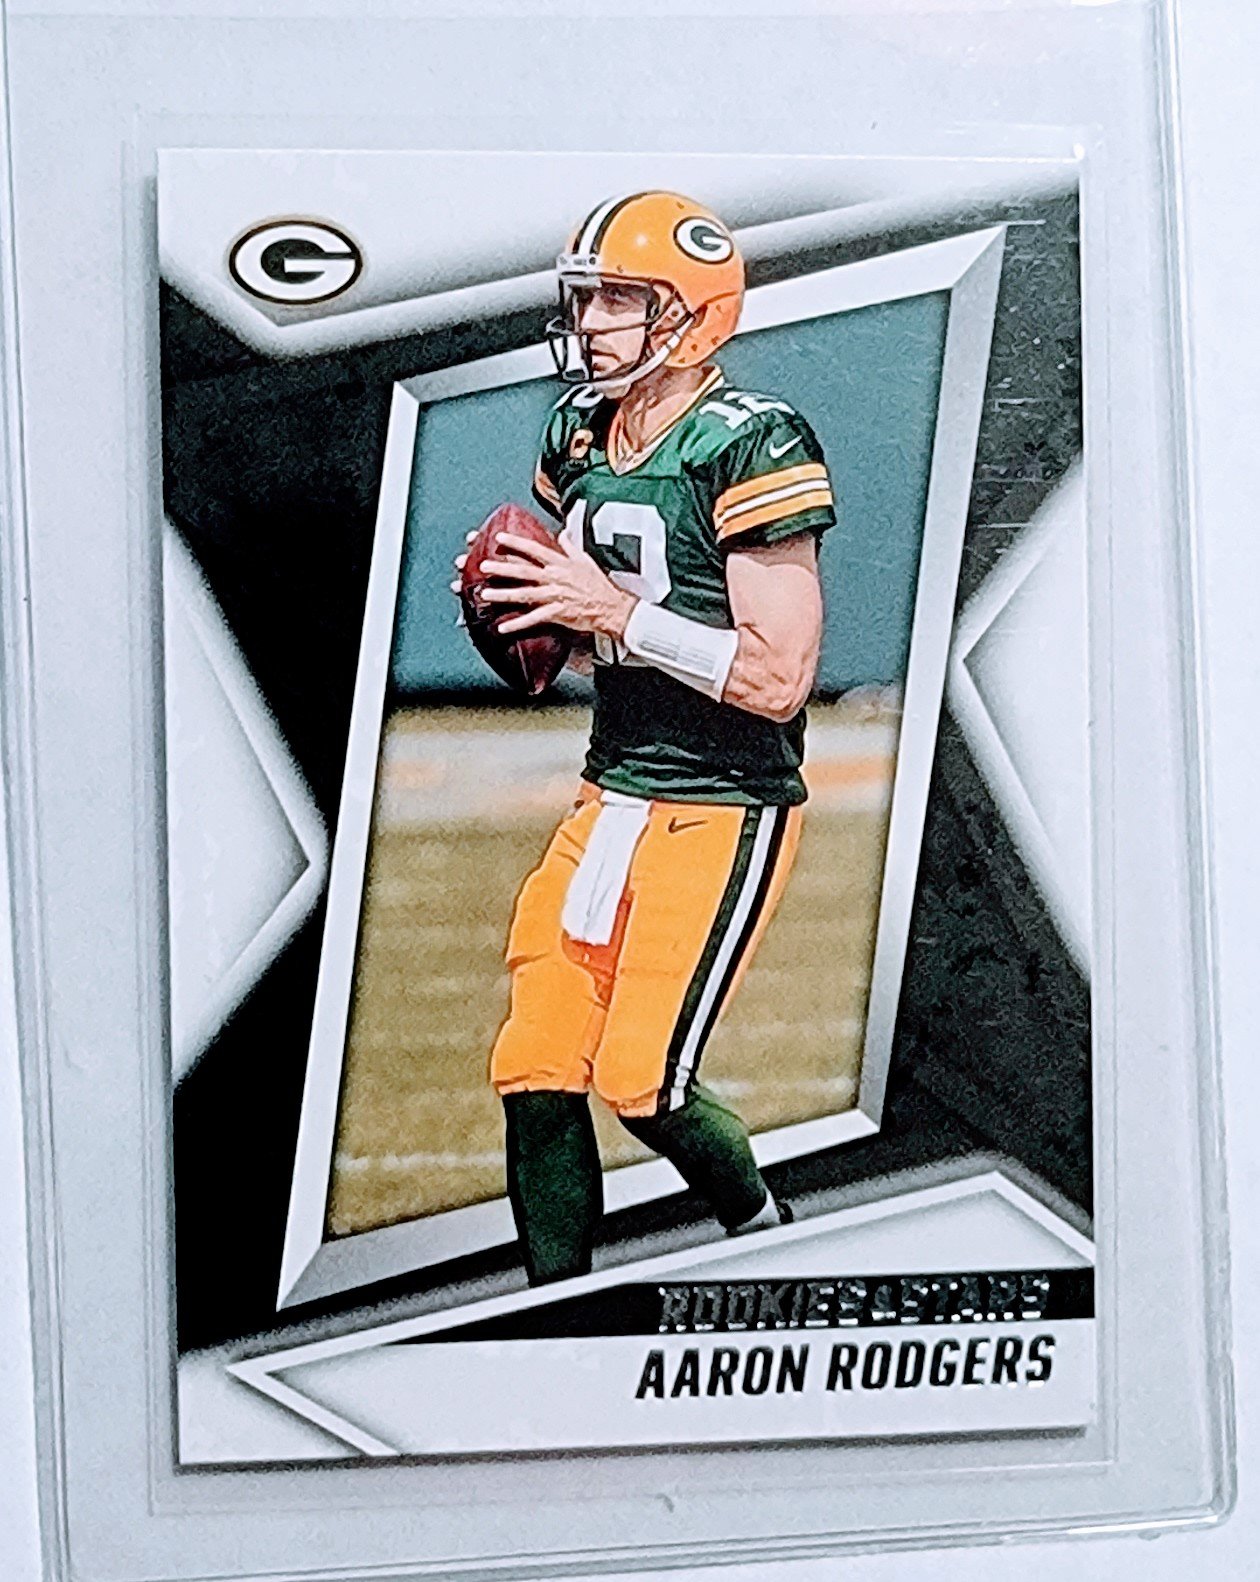 2021 Panini Rookies and Stars Aaron Rodgers Football Card AVM1 simple Xclusive Collectibles   